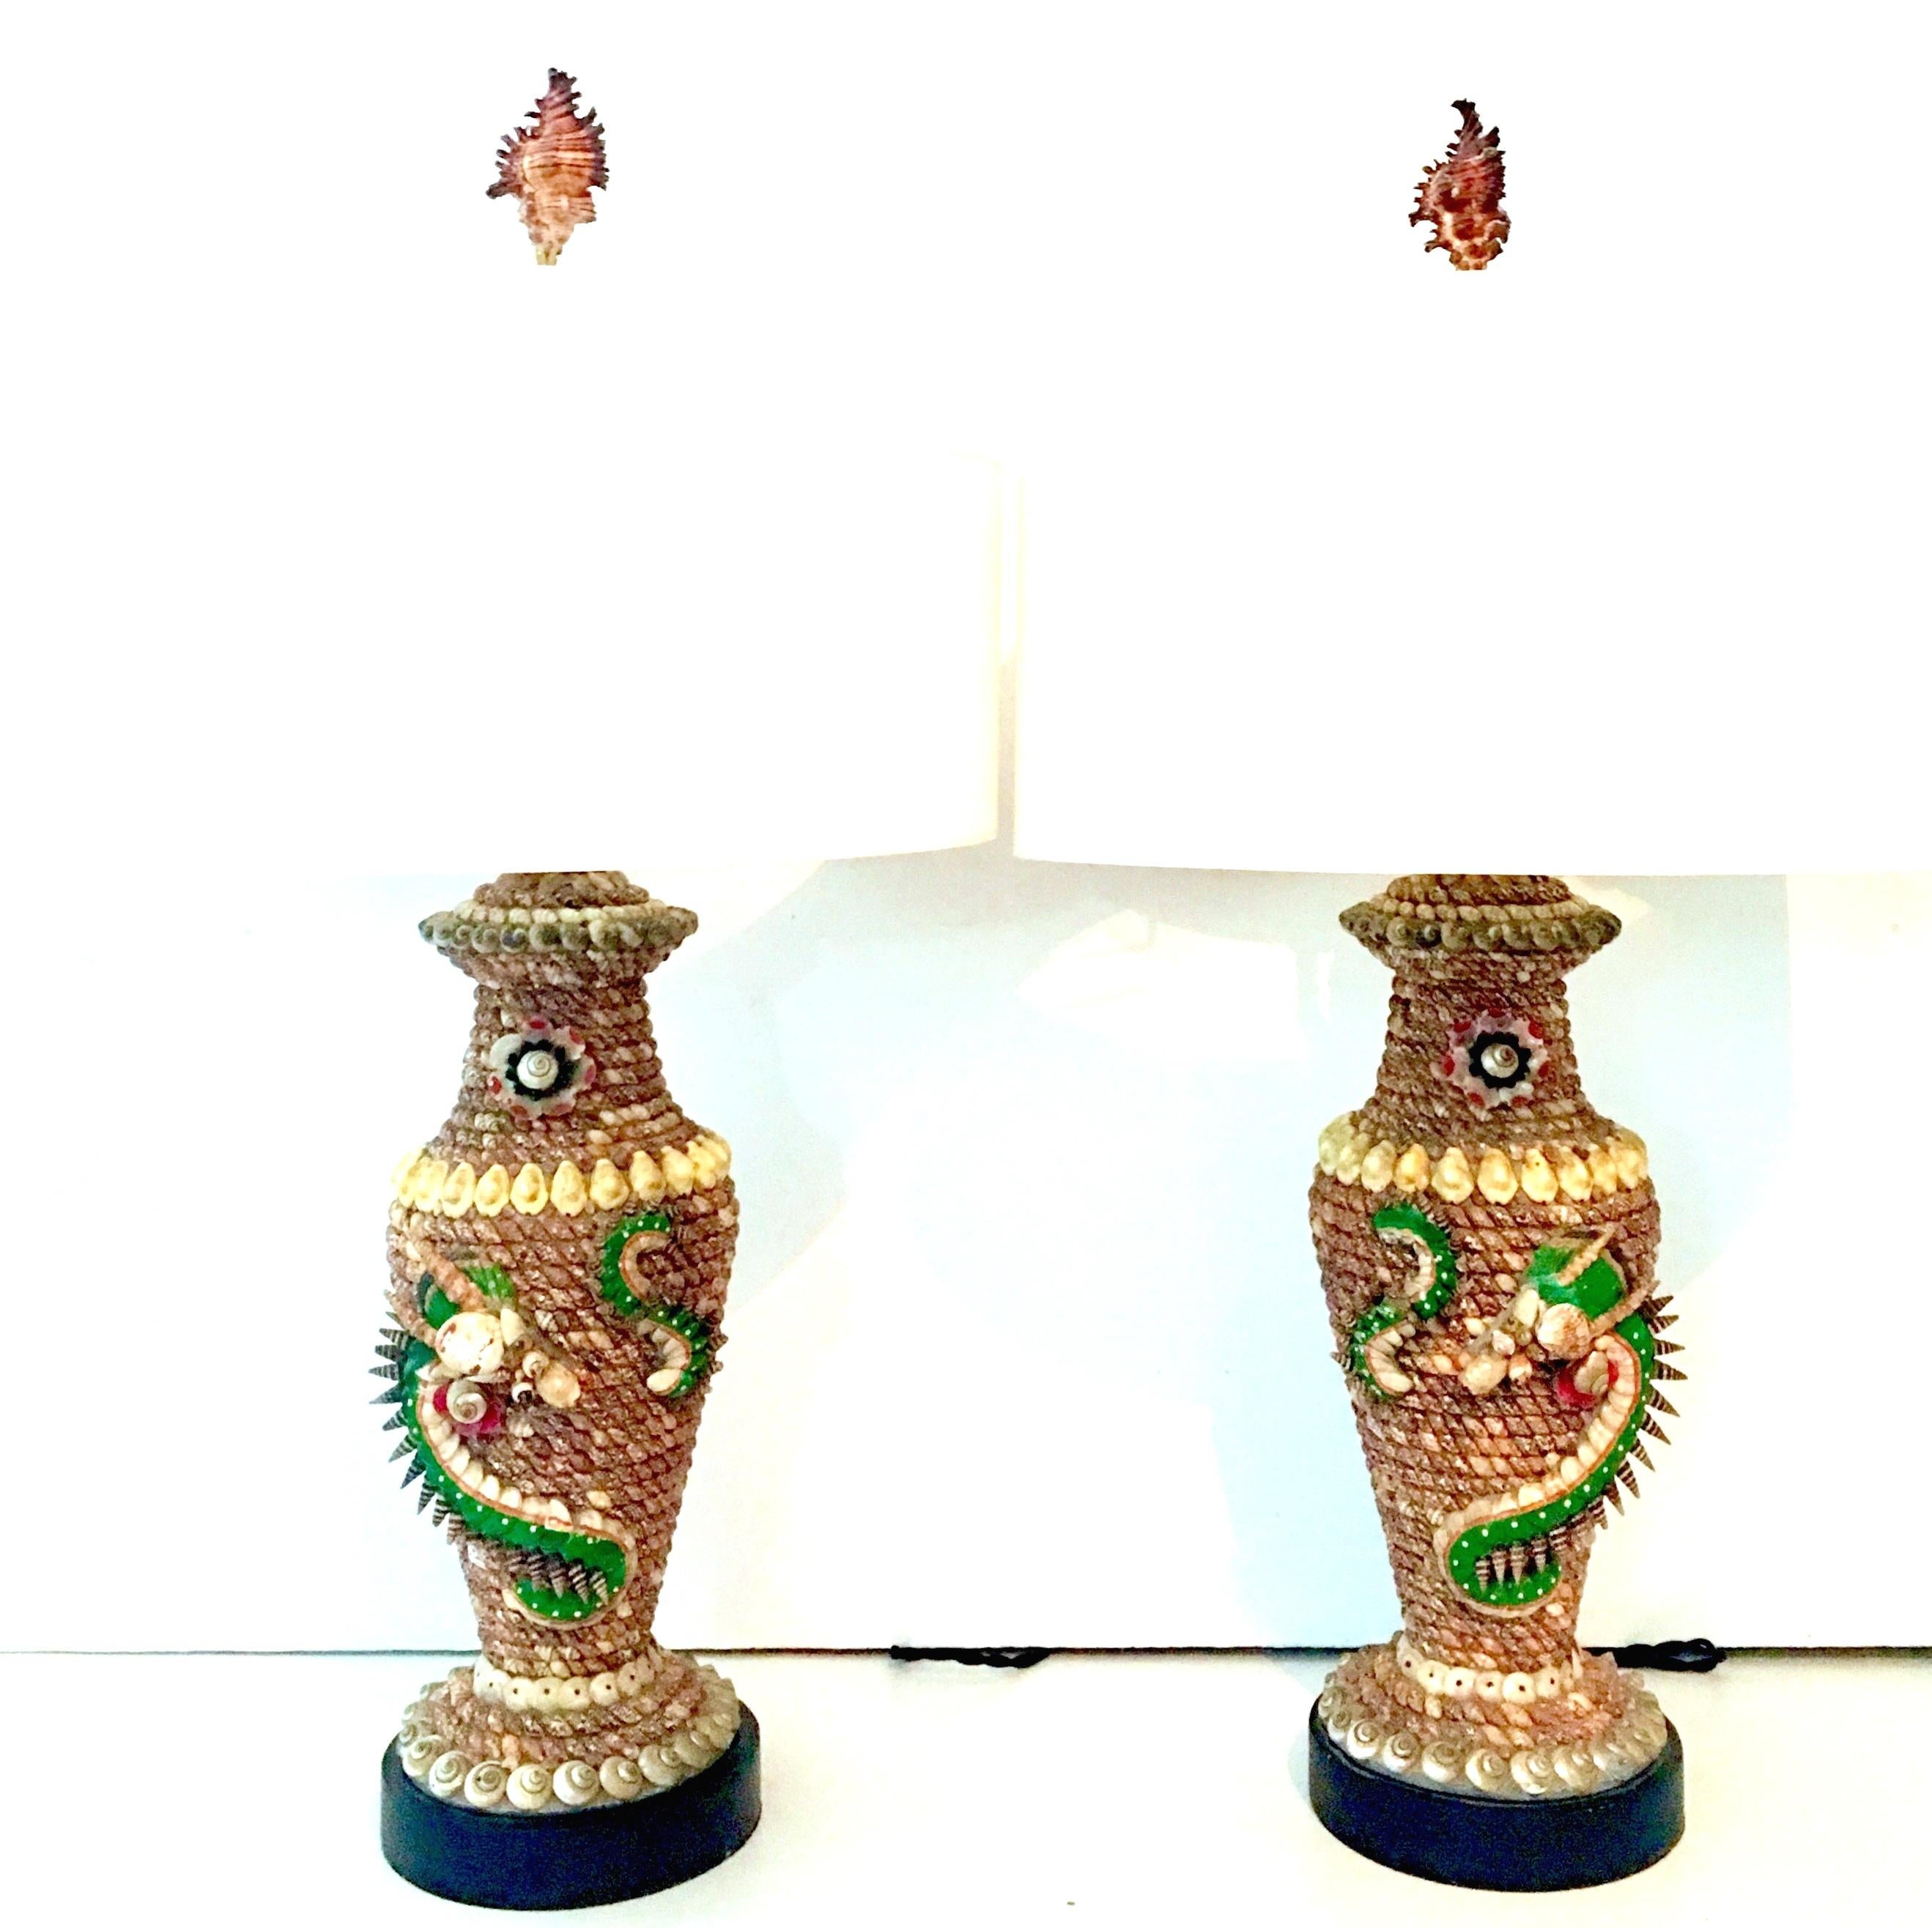 Pair Of Rare Mid-20th Century Tony Duquette style finely hand crafted seashell encrusted dragon motif high relief table lamps. These hand crafted table lamps feature miniature sea shells in a variety of colors, painstakingly hand applied with a high